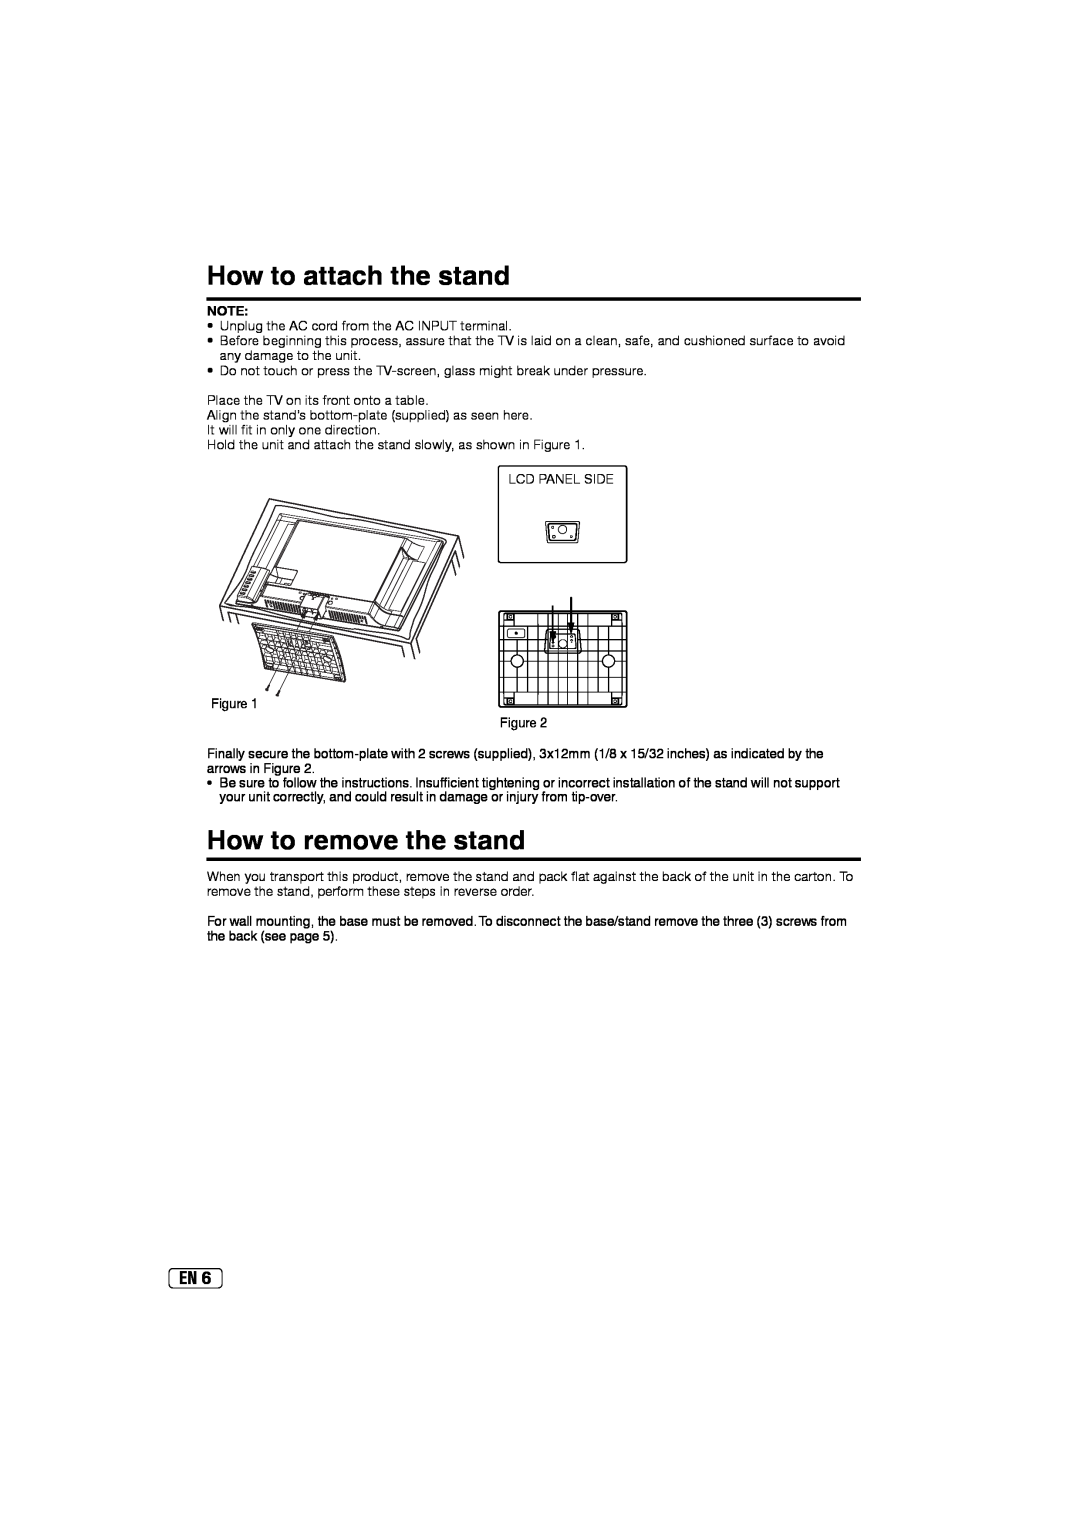 Sansui SLED2237 owner manual How to attach the stand, How to remove the stand 